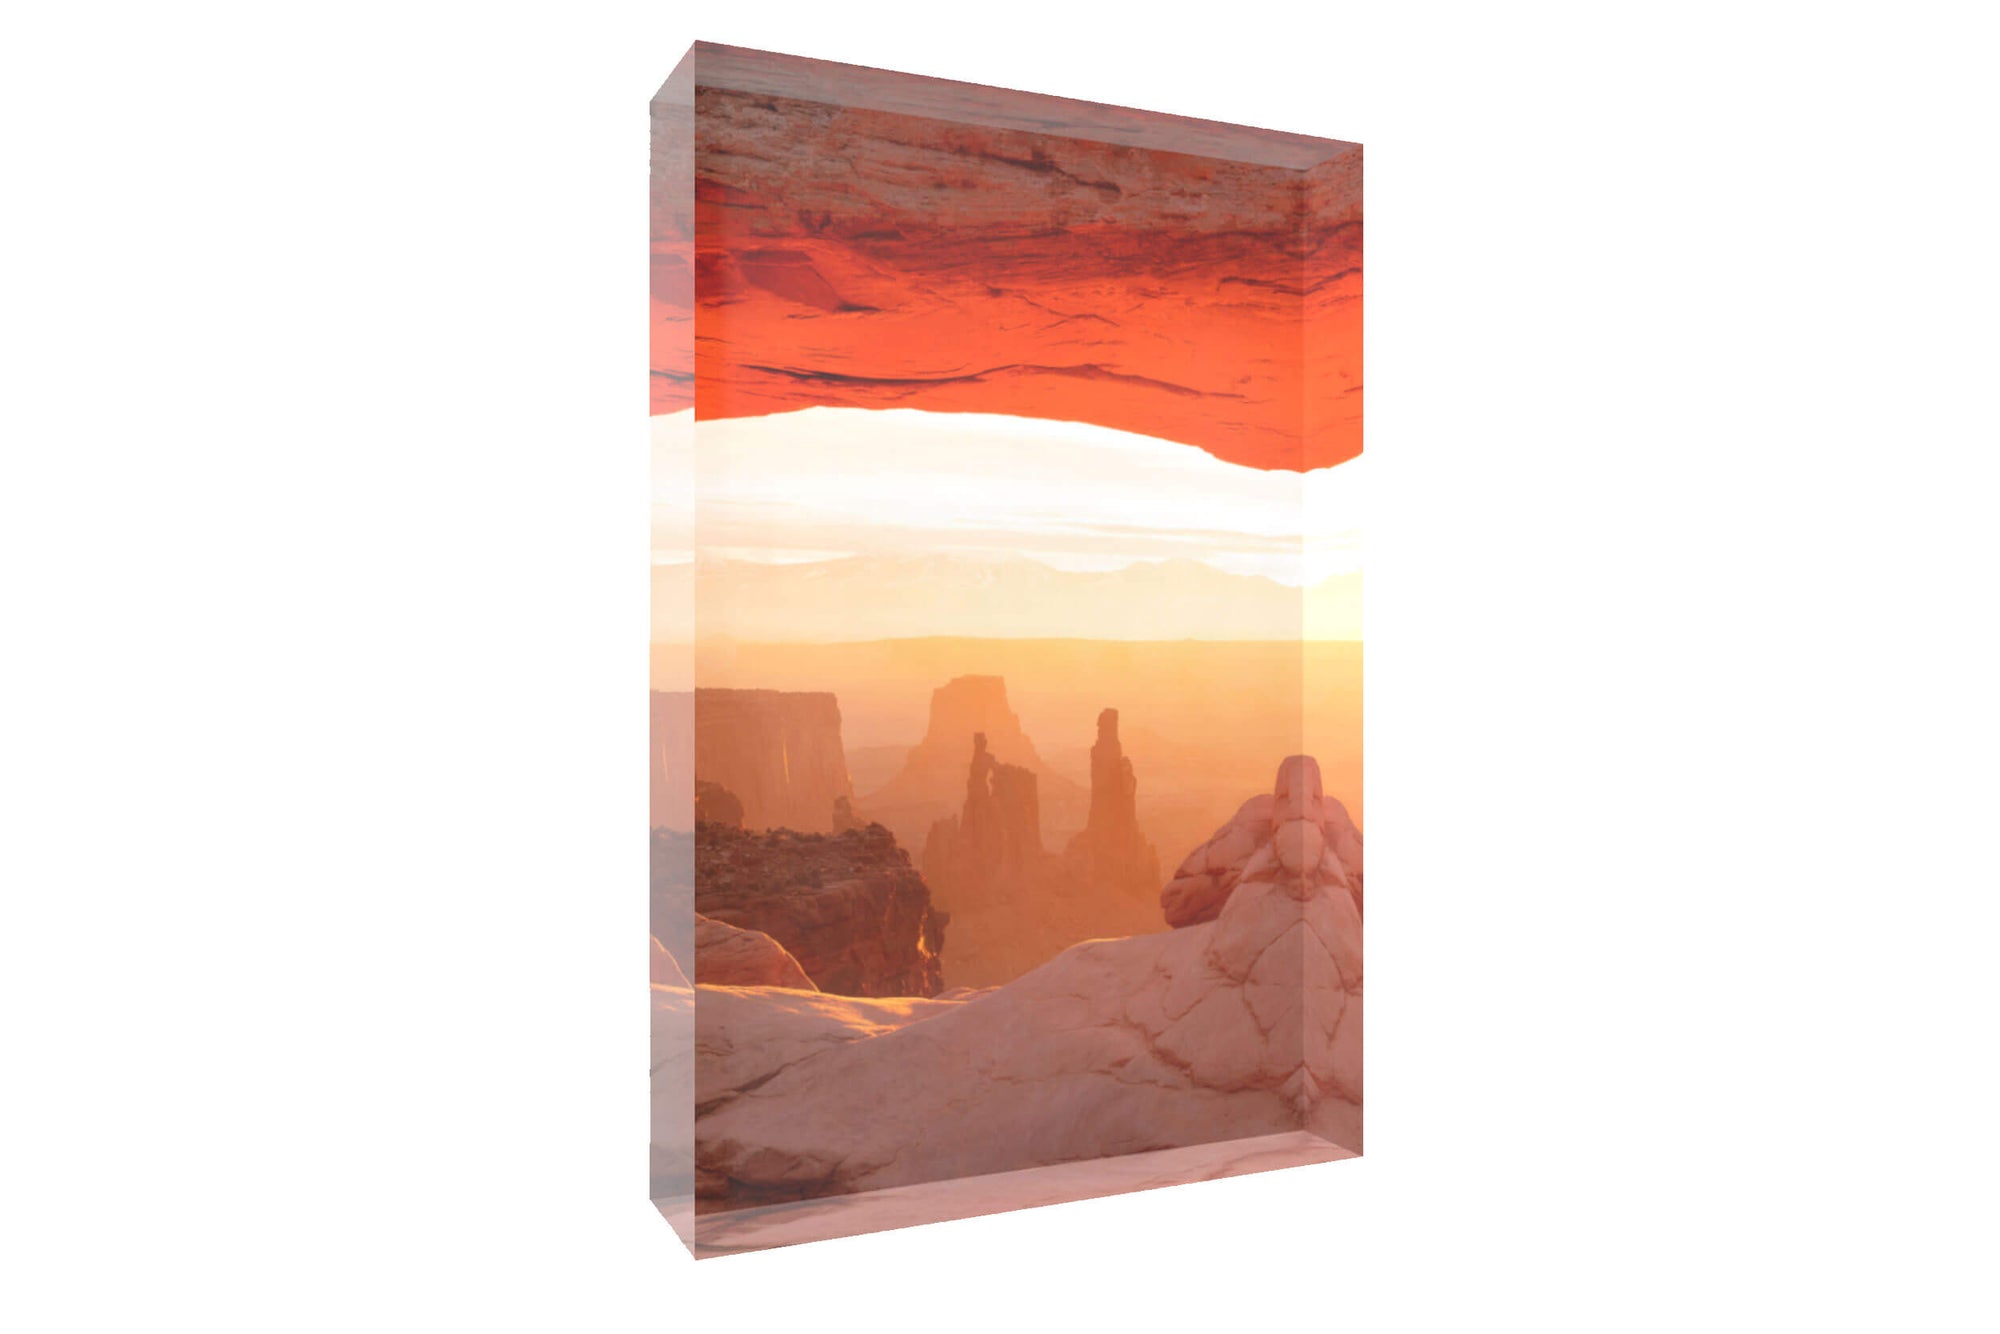 A picture of Mesa Arch shown as an acrylic block.